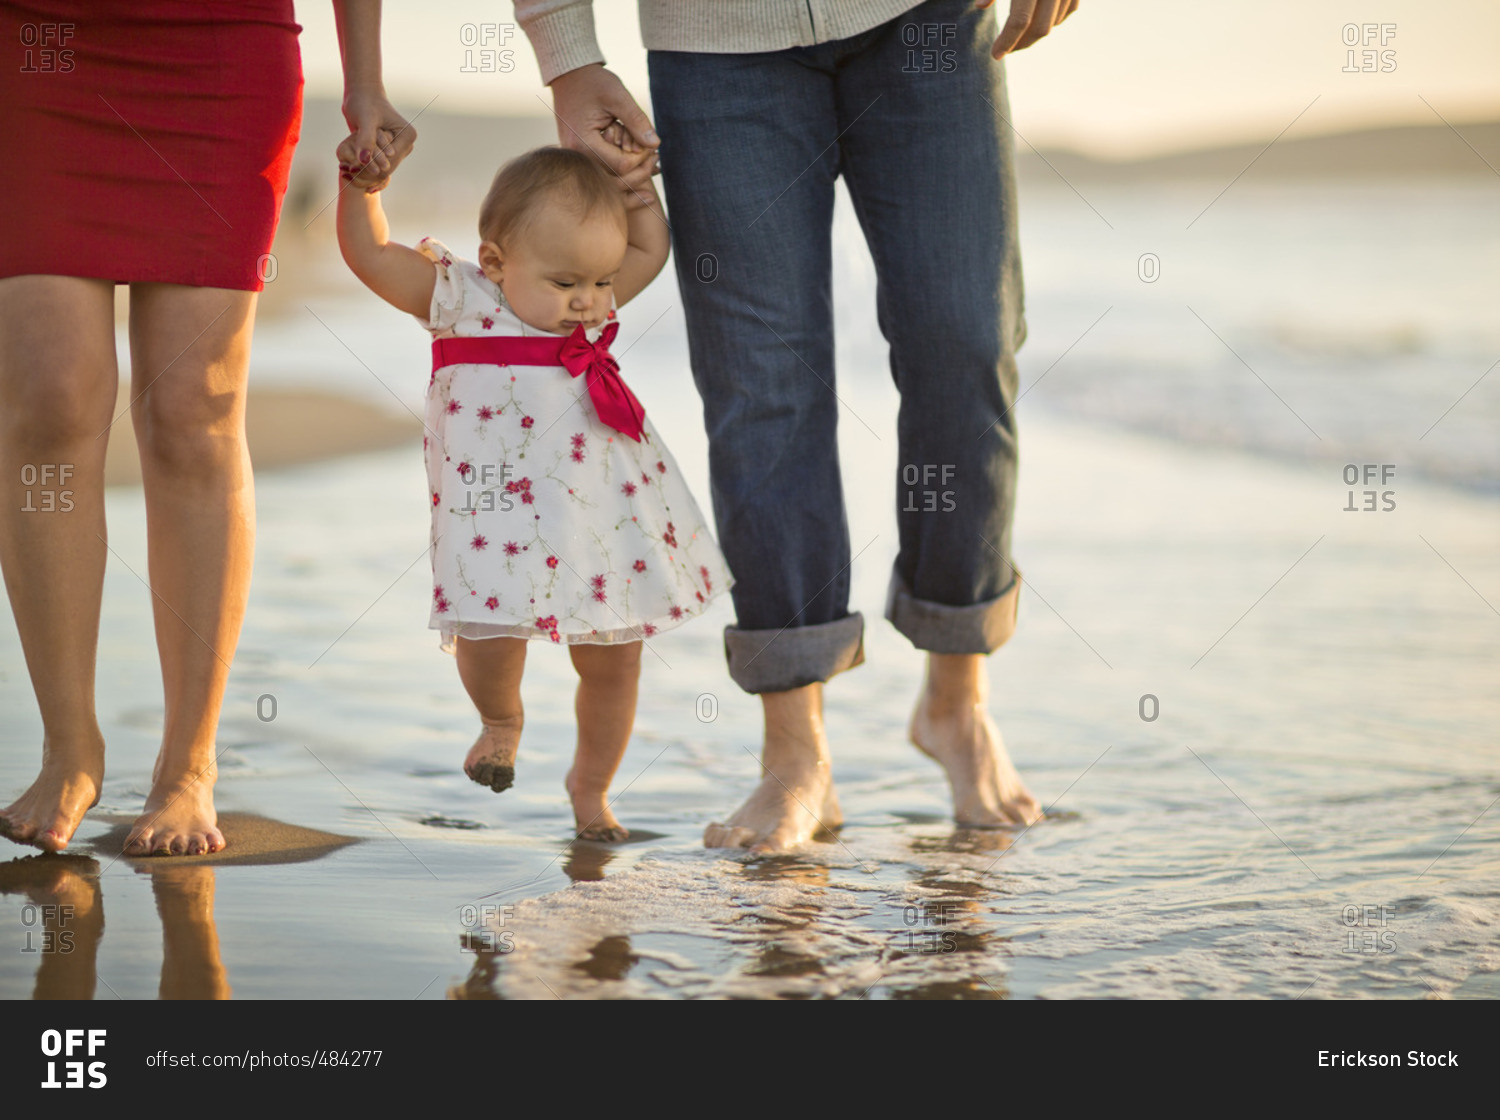 Parents walking with their baby girl on the beach.